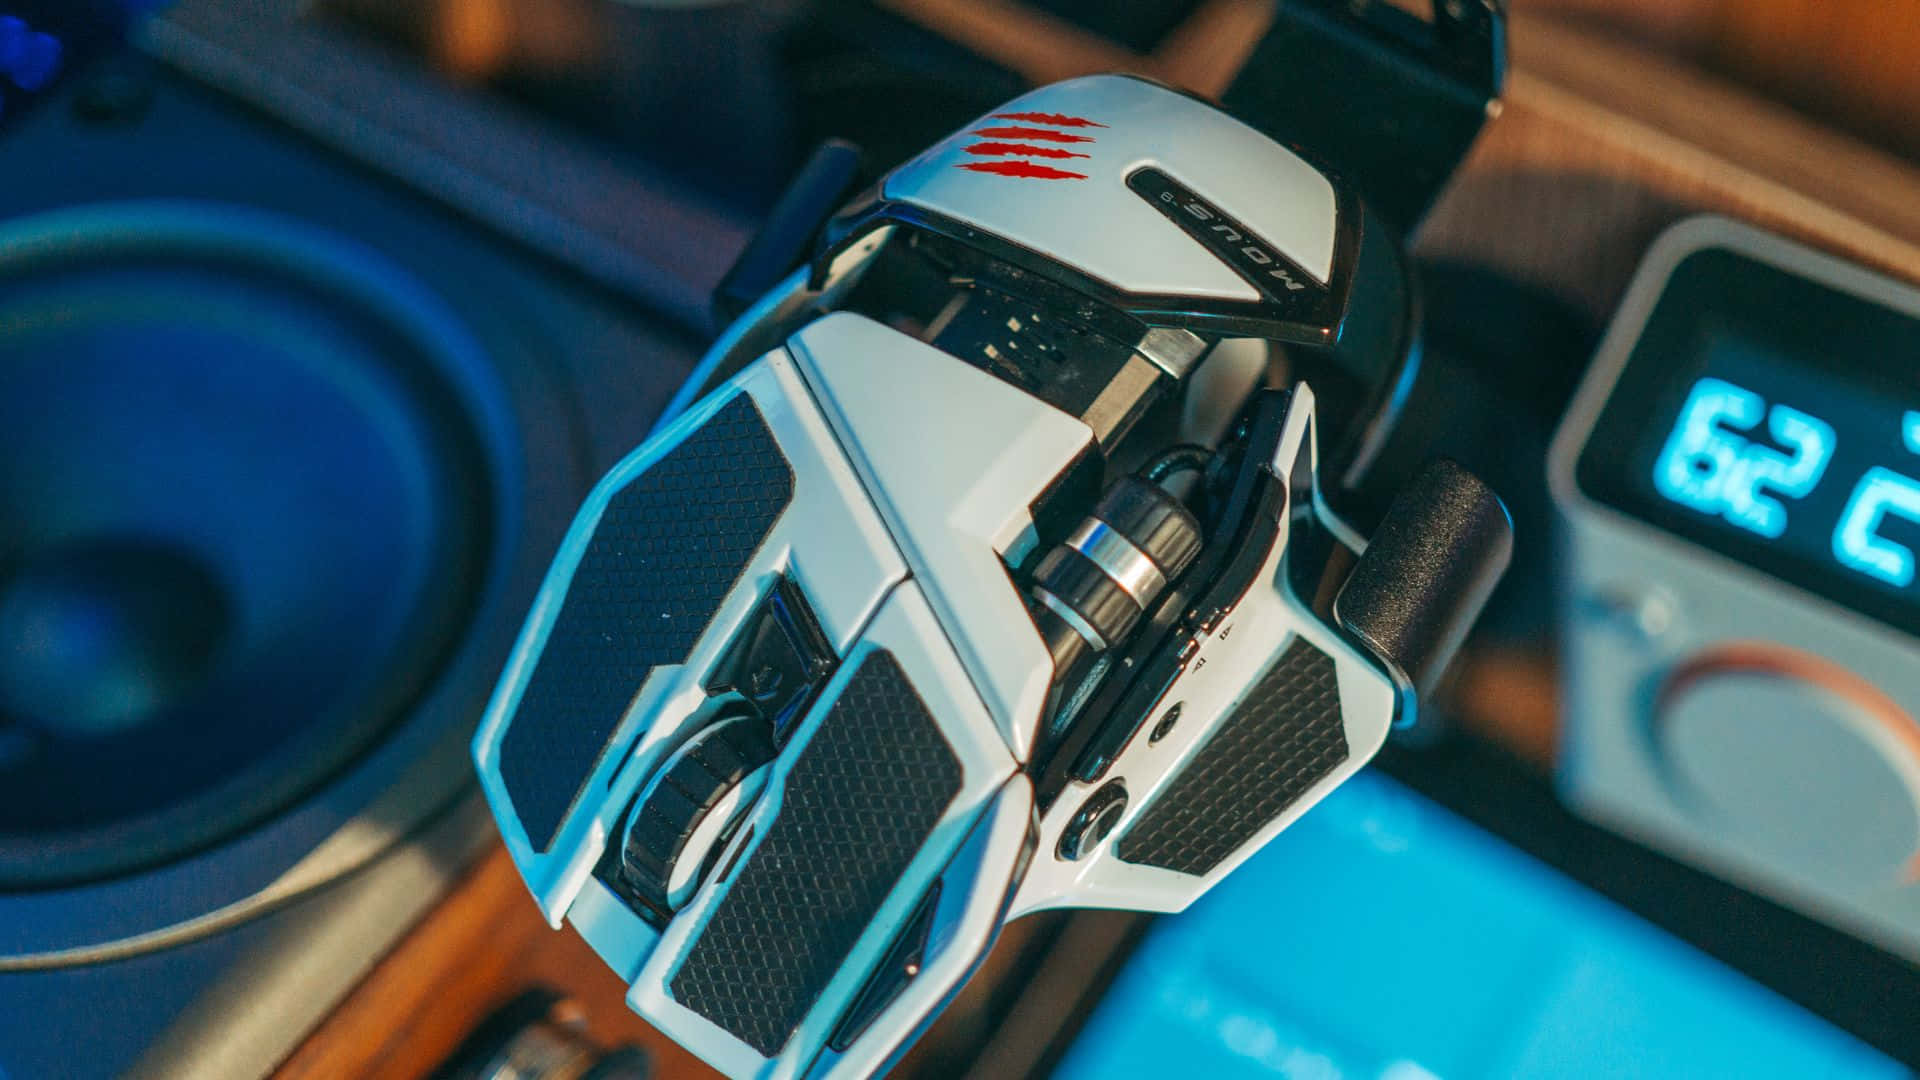 Take your gaming to the next level with this gaming mouse. Wallpaper